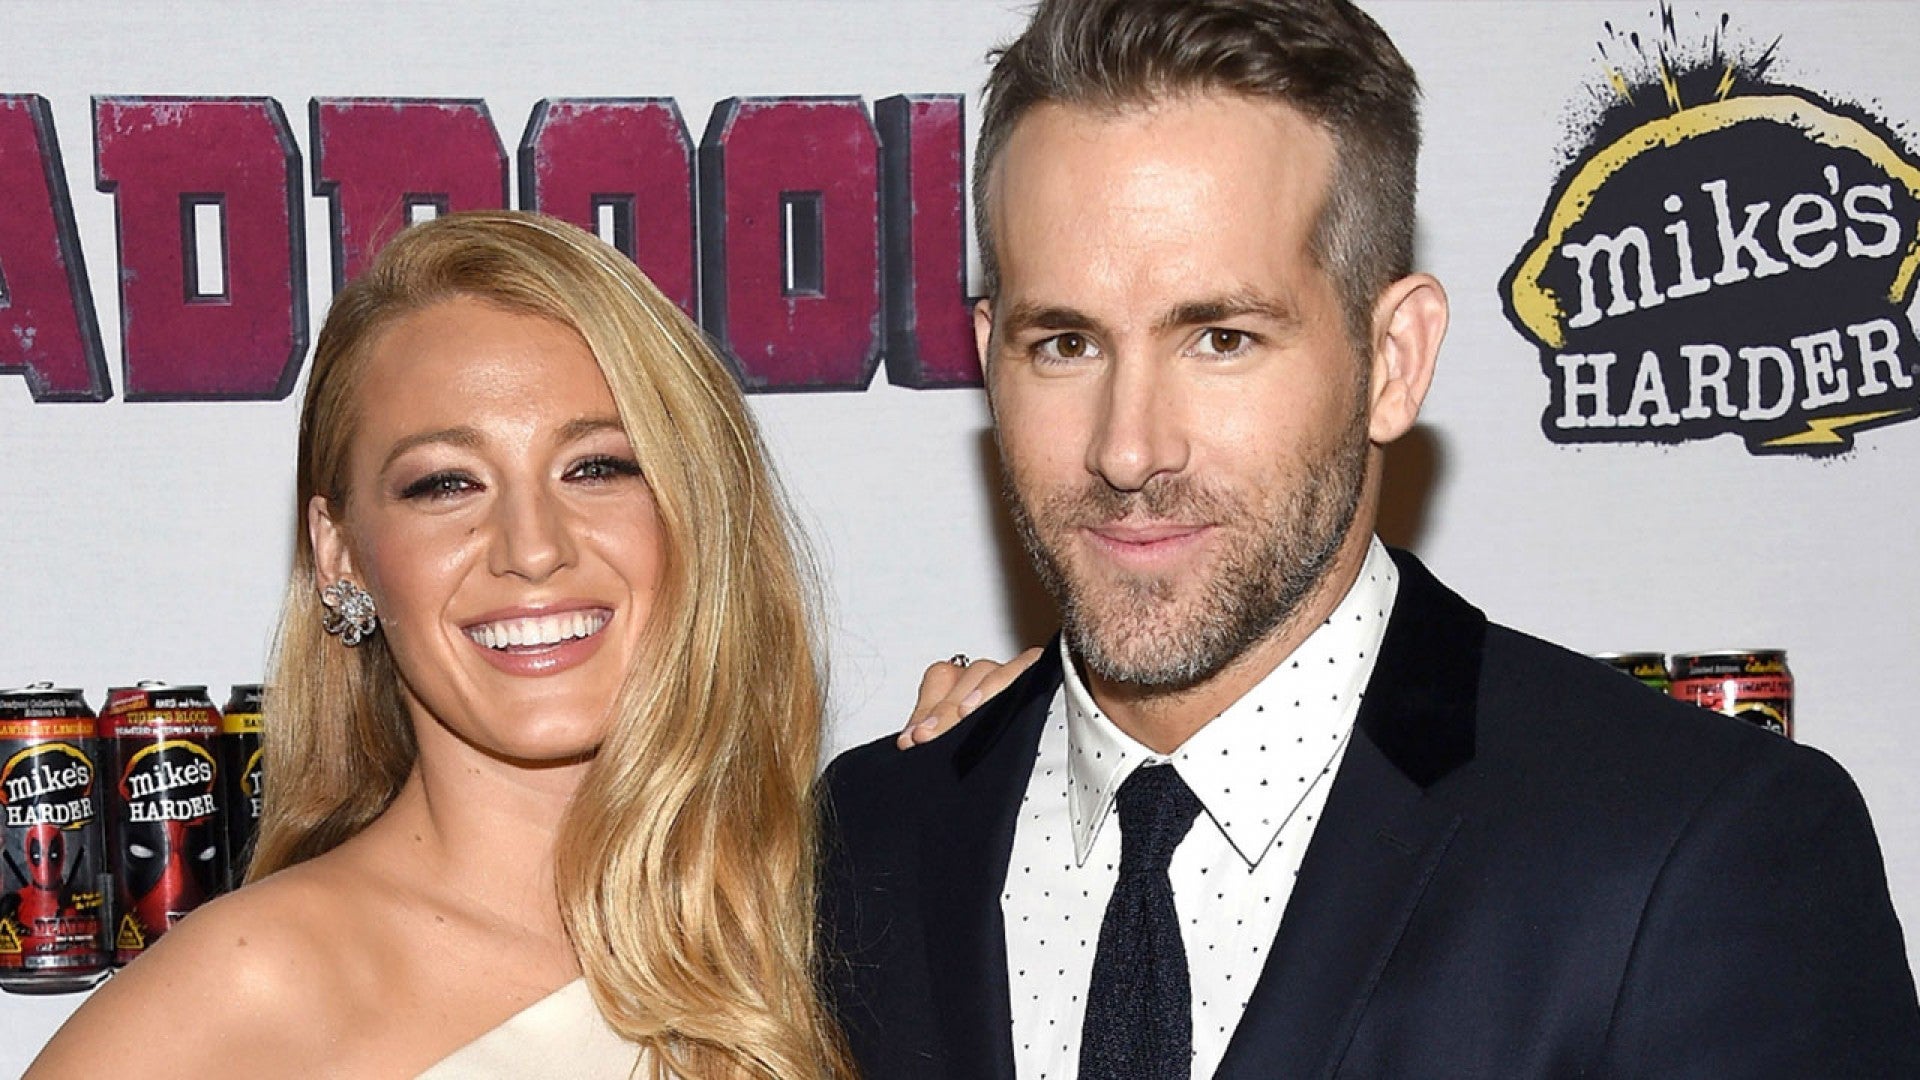 Ryan Reynolds reveals his inner circle which includes wife Blake, mom and  brother